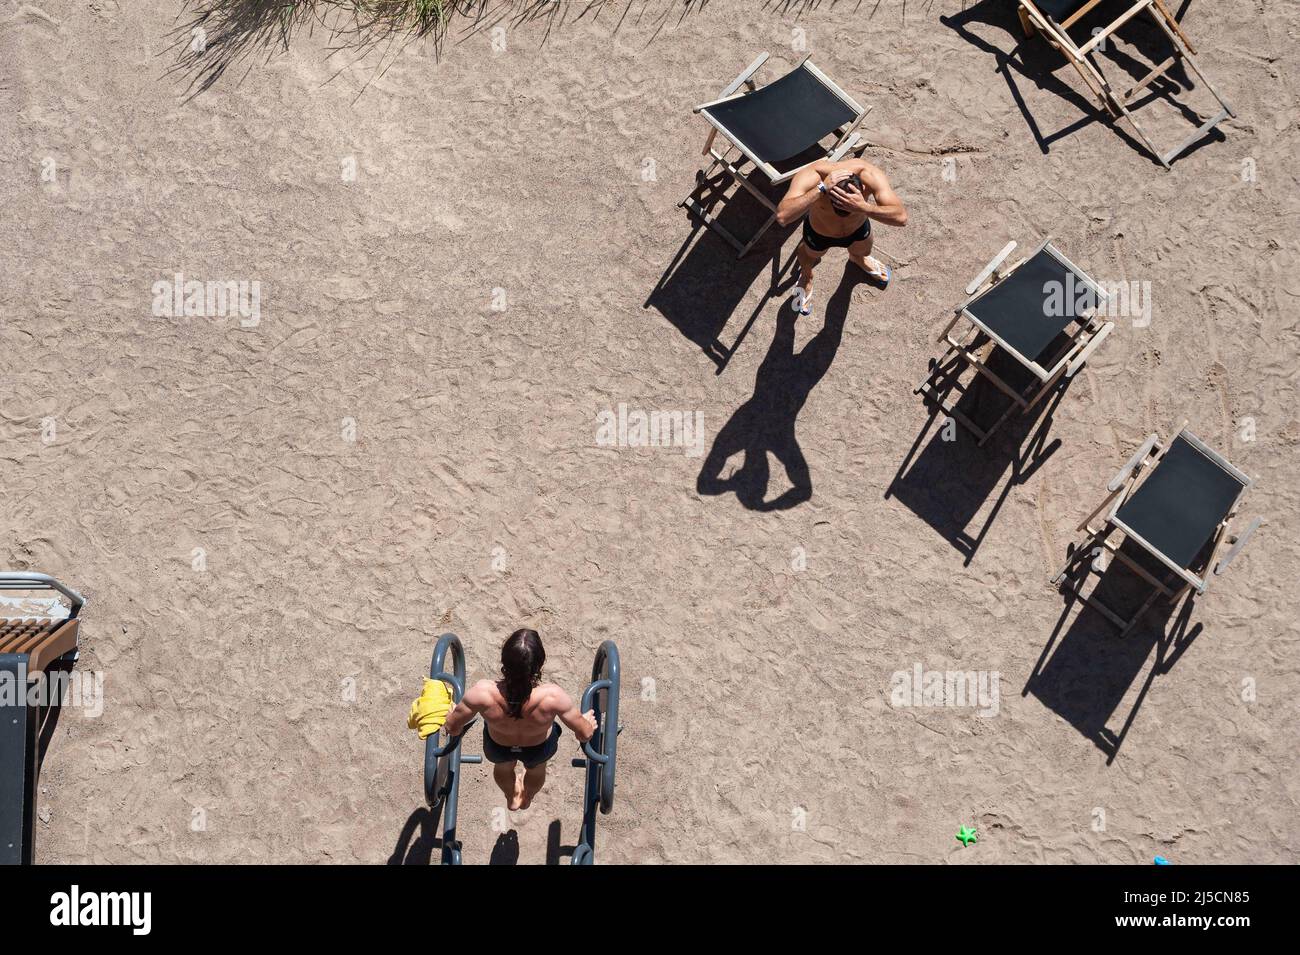 Jun. 23, 2018, Helsinki, Finland, Europe - Two men exercise on a warm summer day with their upper bodies exposed on a municipal public fitness track in the Finnish capital. [automated translation] Stock Photo